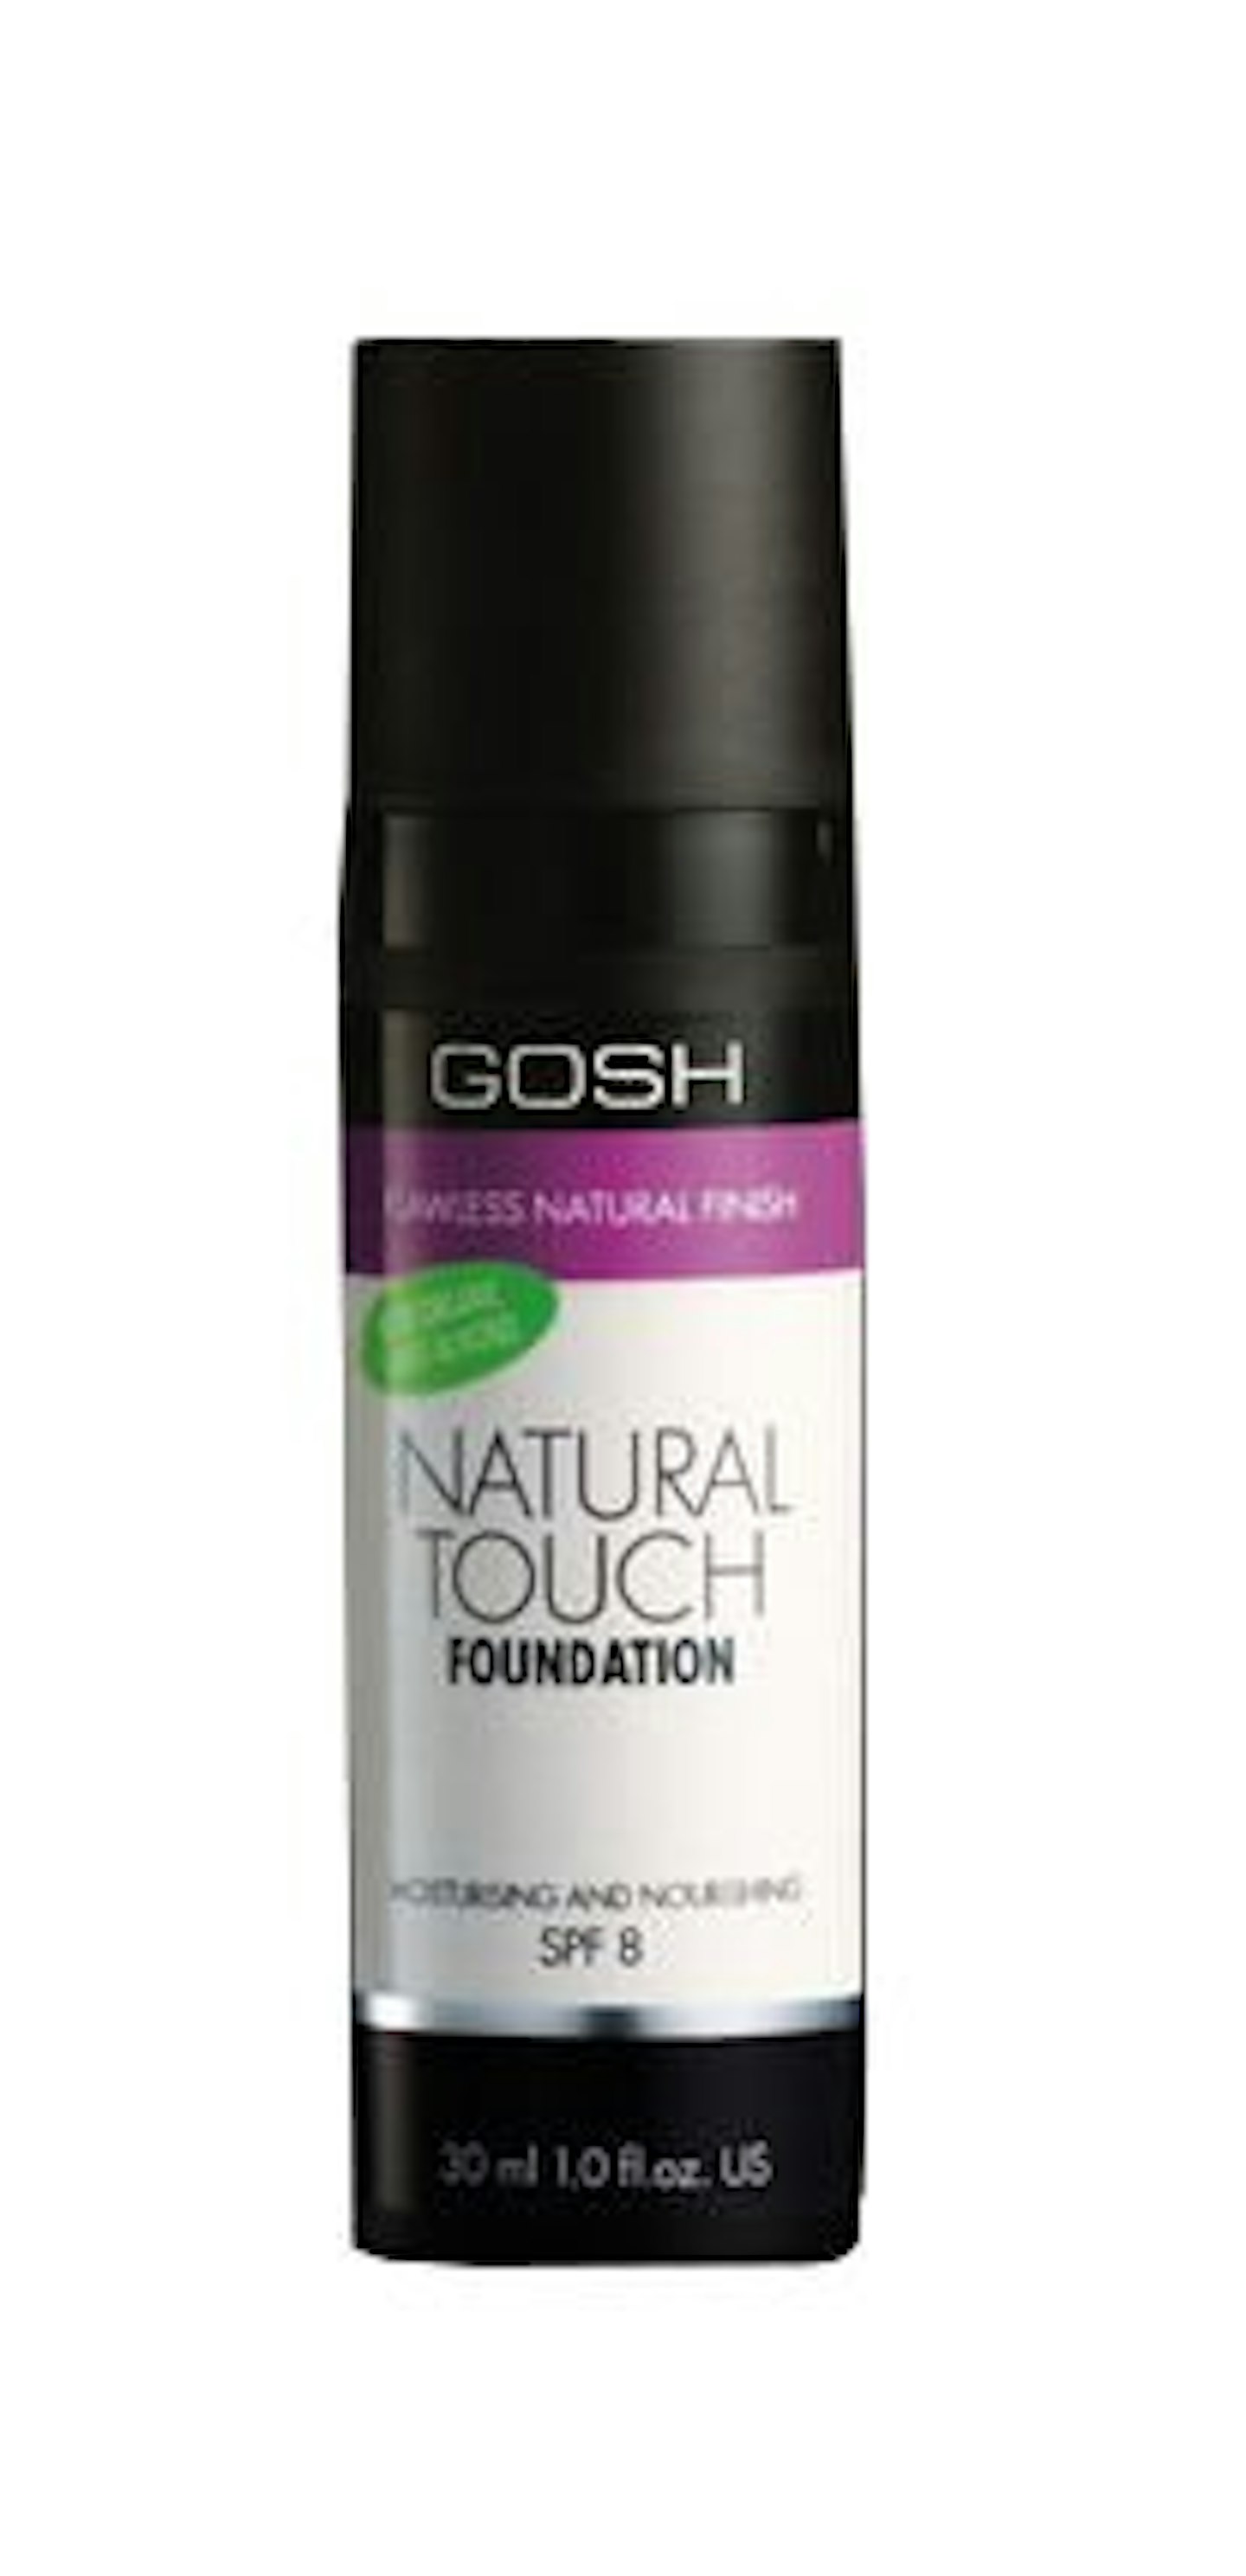 GOSH Natural Touch Foundation